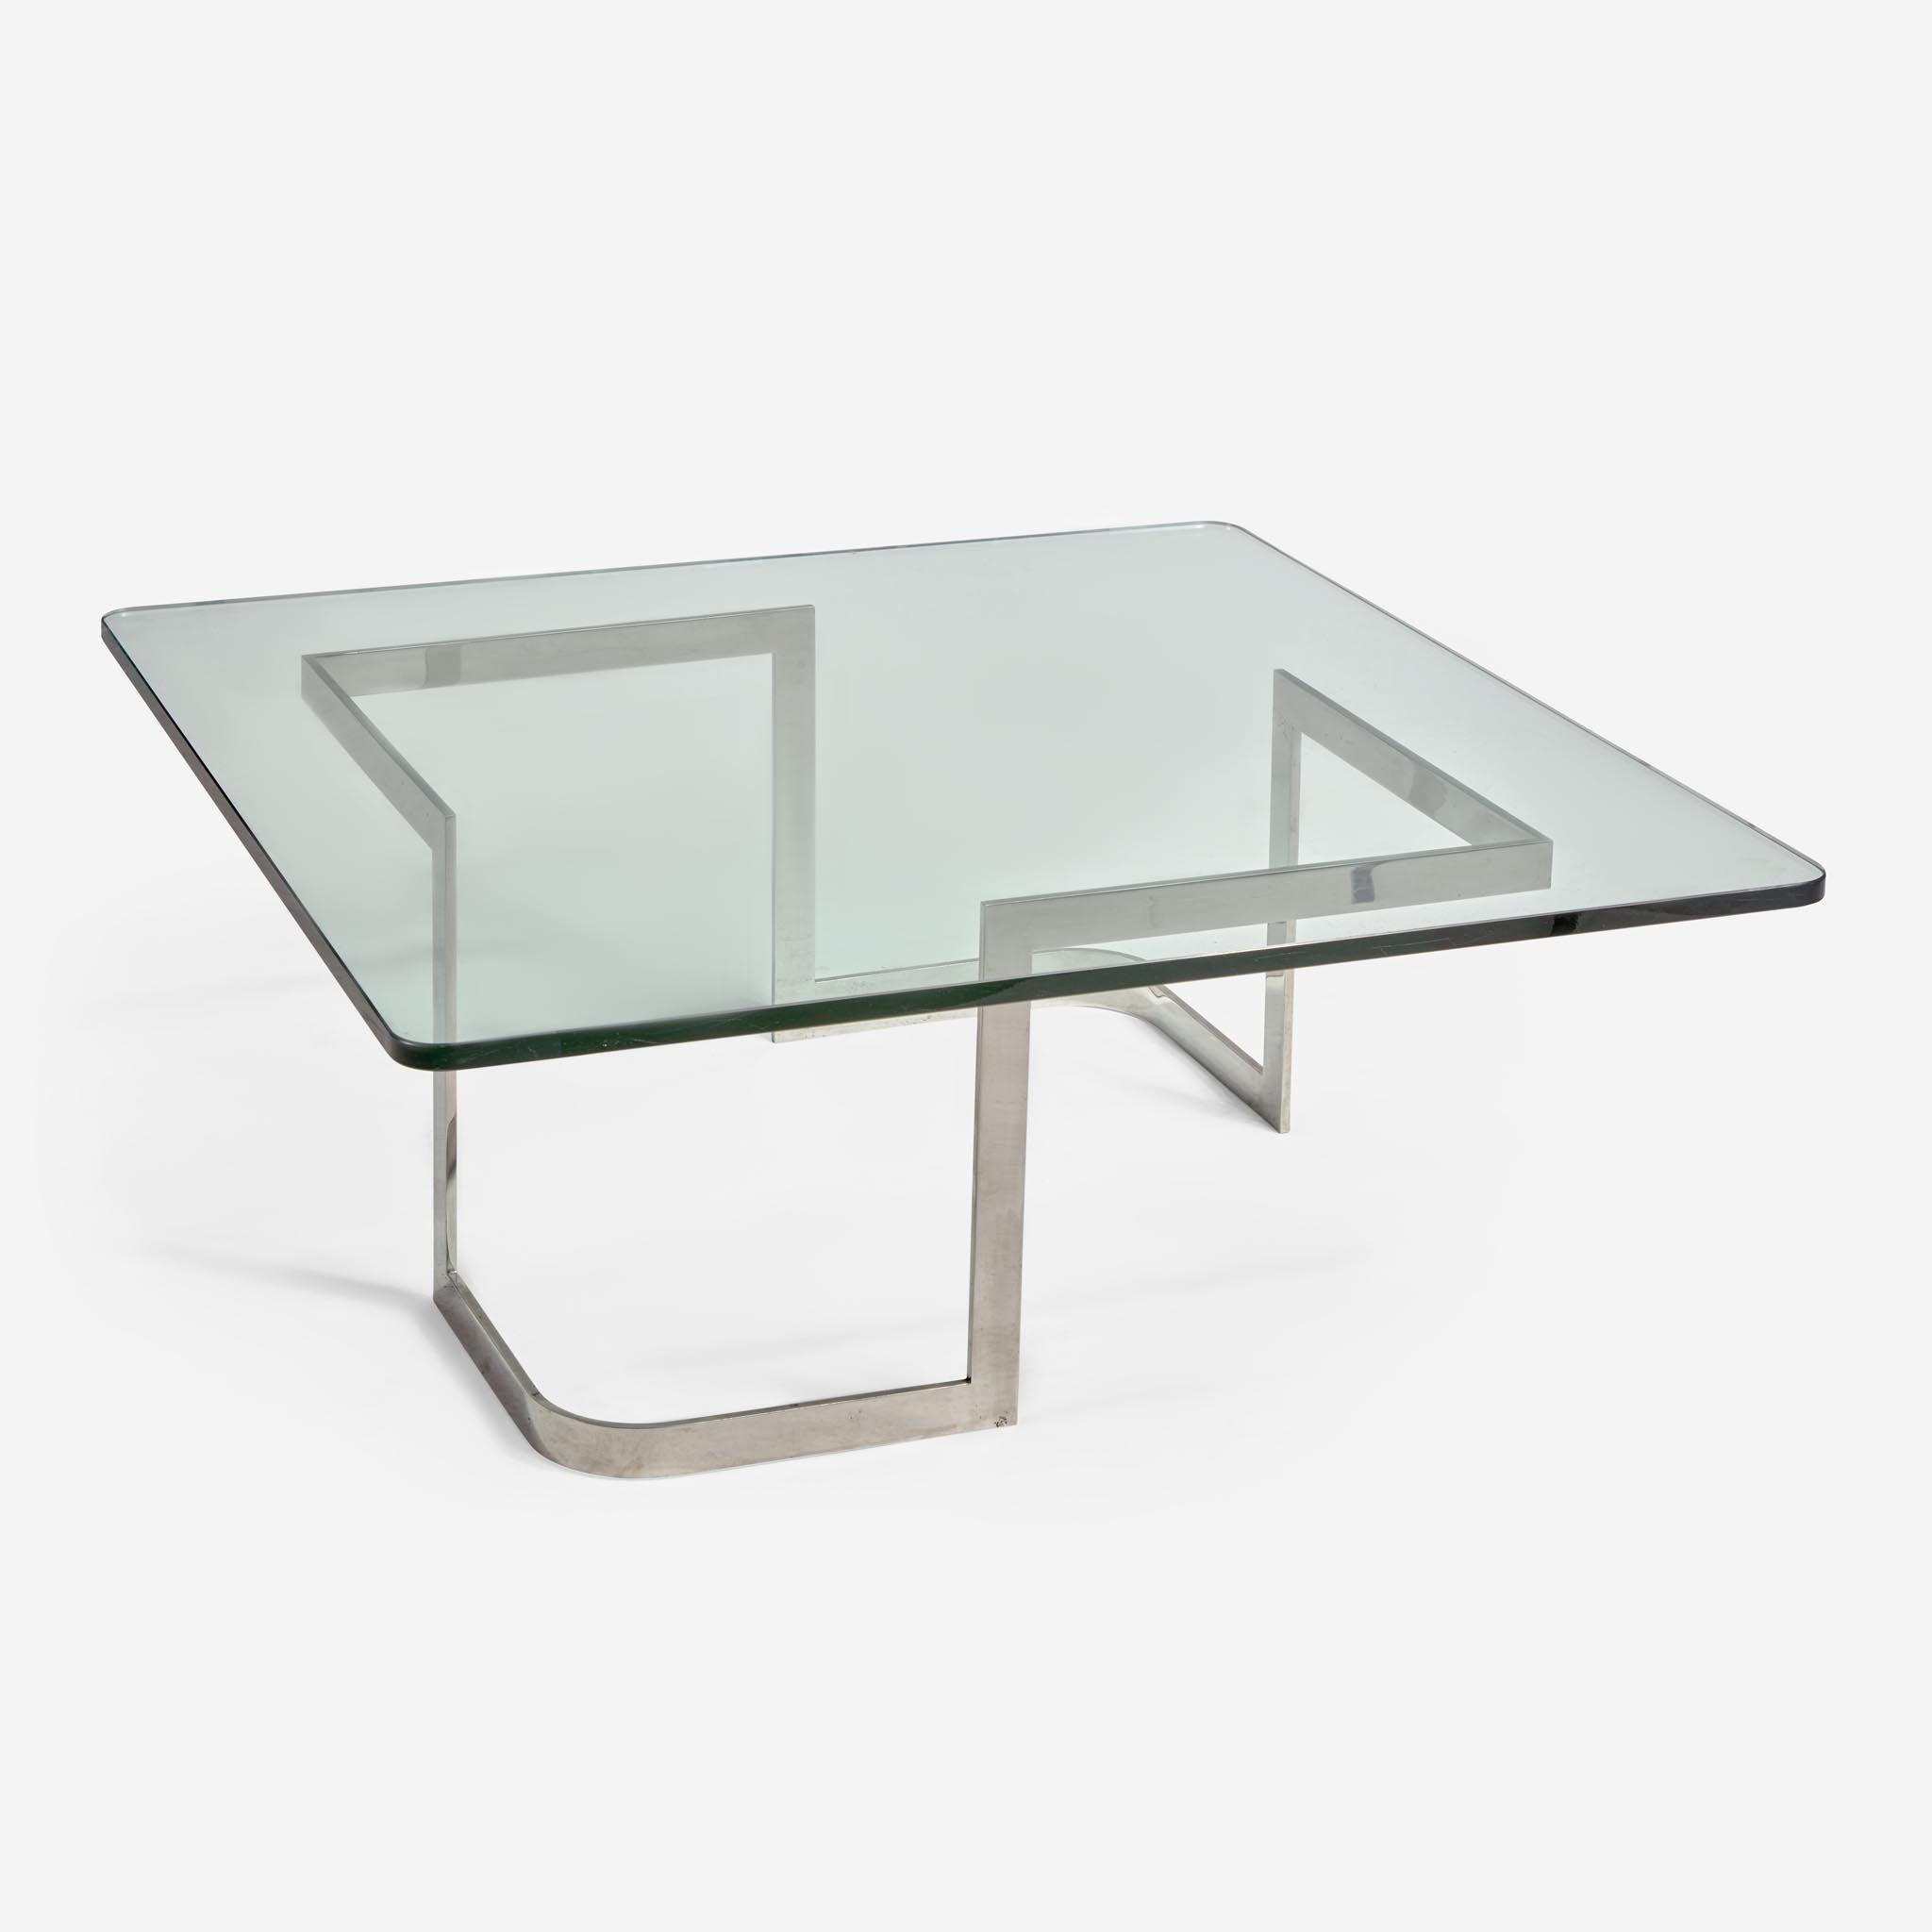 Originally installed in the living room of Vladimir Kagan and Erica Wilson's Park Avenue apartment. A true post modern piece constructed of polished stainless steel with a tempered glass top. Designed as a square glass top with a curved and straight